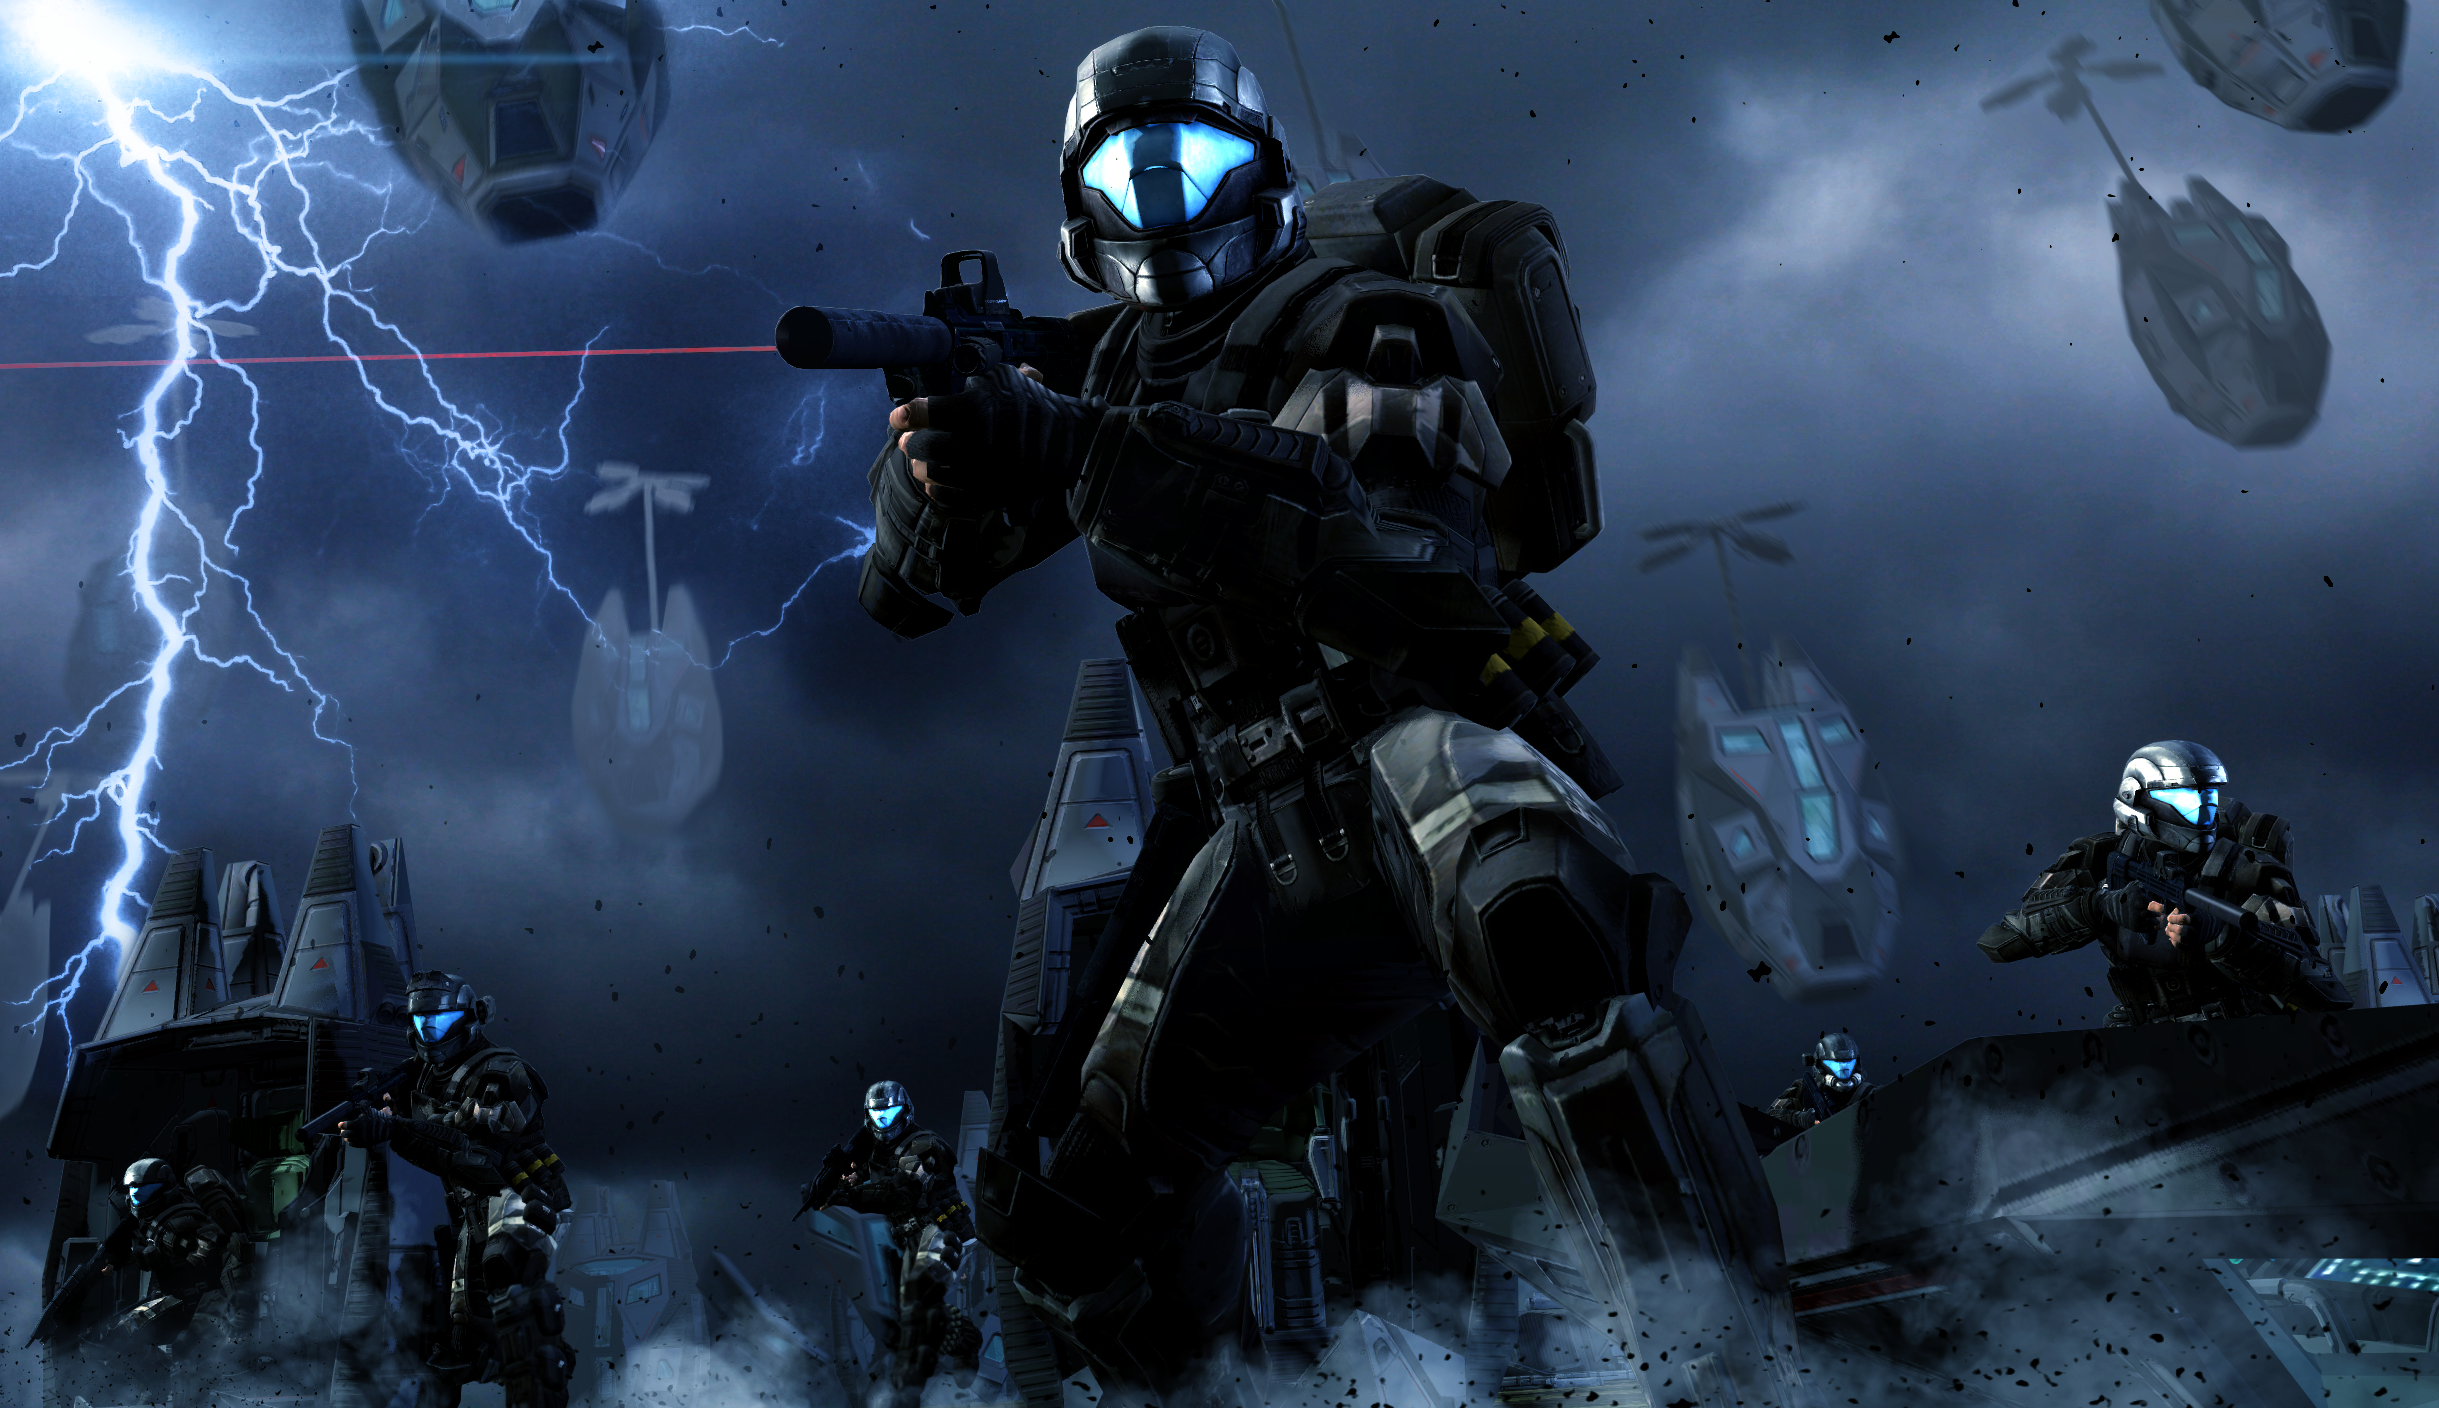 Video Games Futuristic Armor Halo Halo 3 ODST ODST Submachine Gun Lightning Soldier Night Video Game 2439x1408